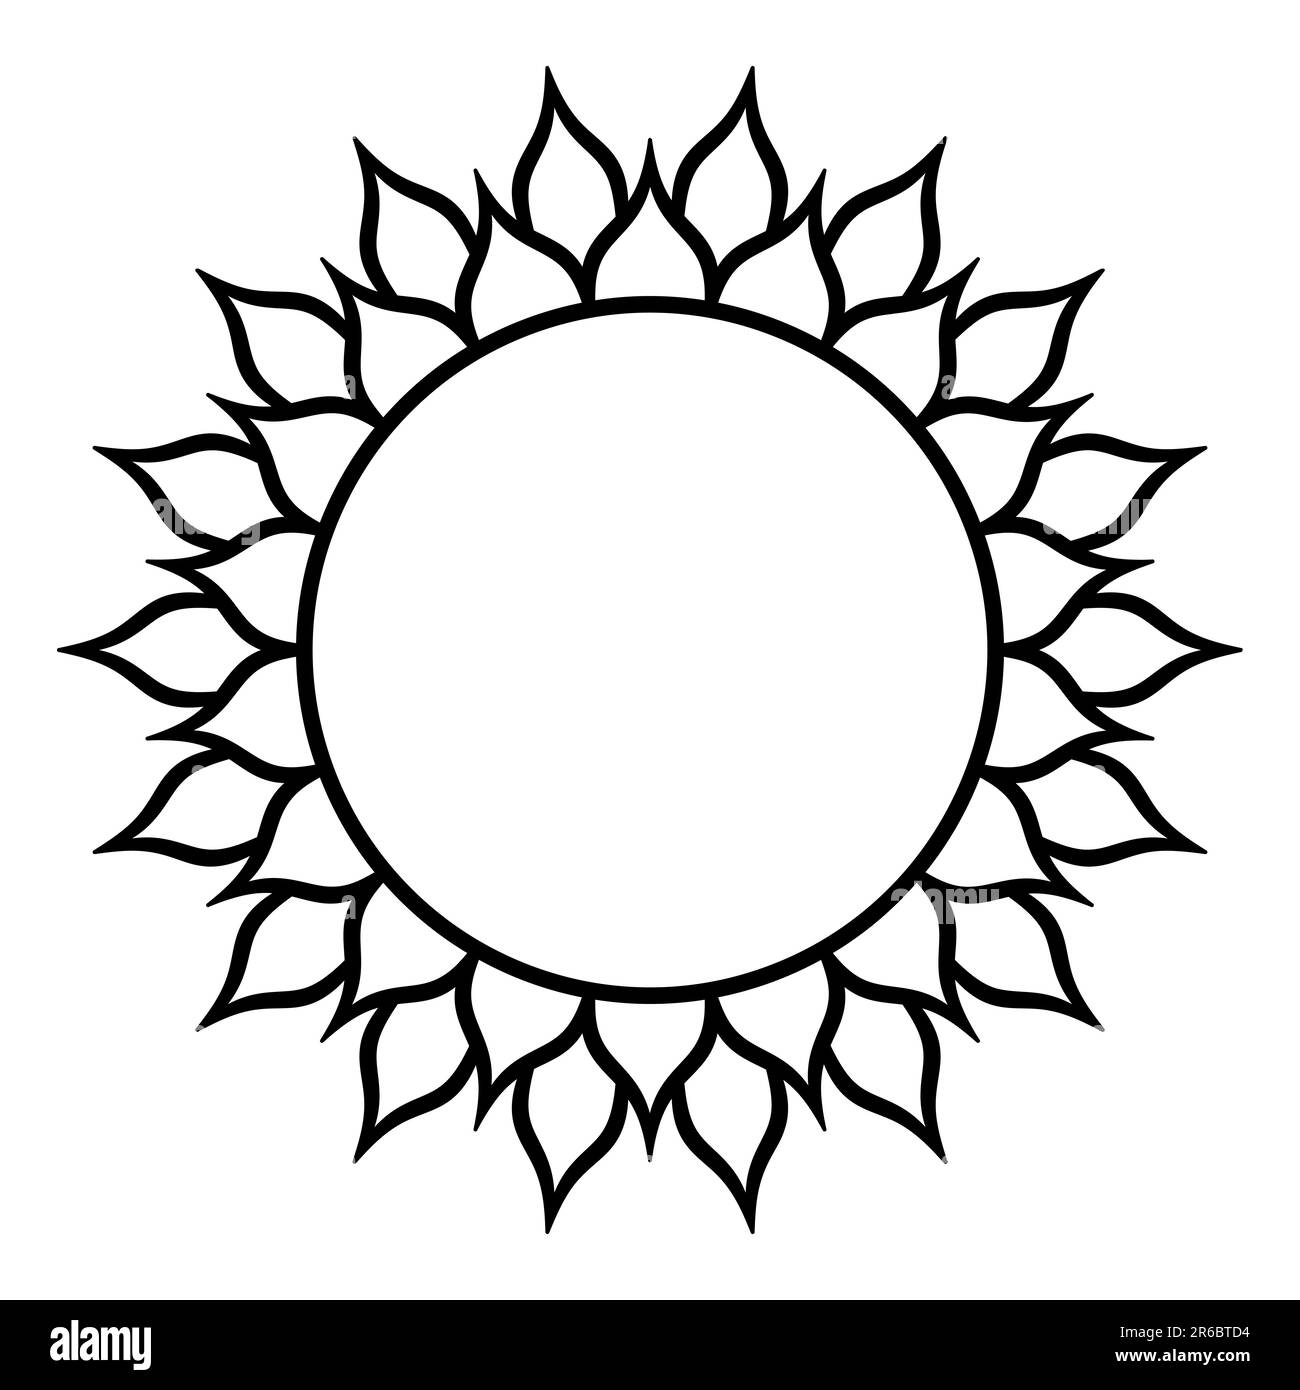 Sunflower symbol with two times eighteen petals, or sun symbol with thirty-six flames. Sacred Geometry, modeled on a crop circle pattern. Stock Photo